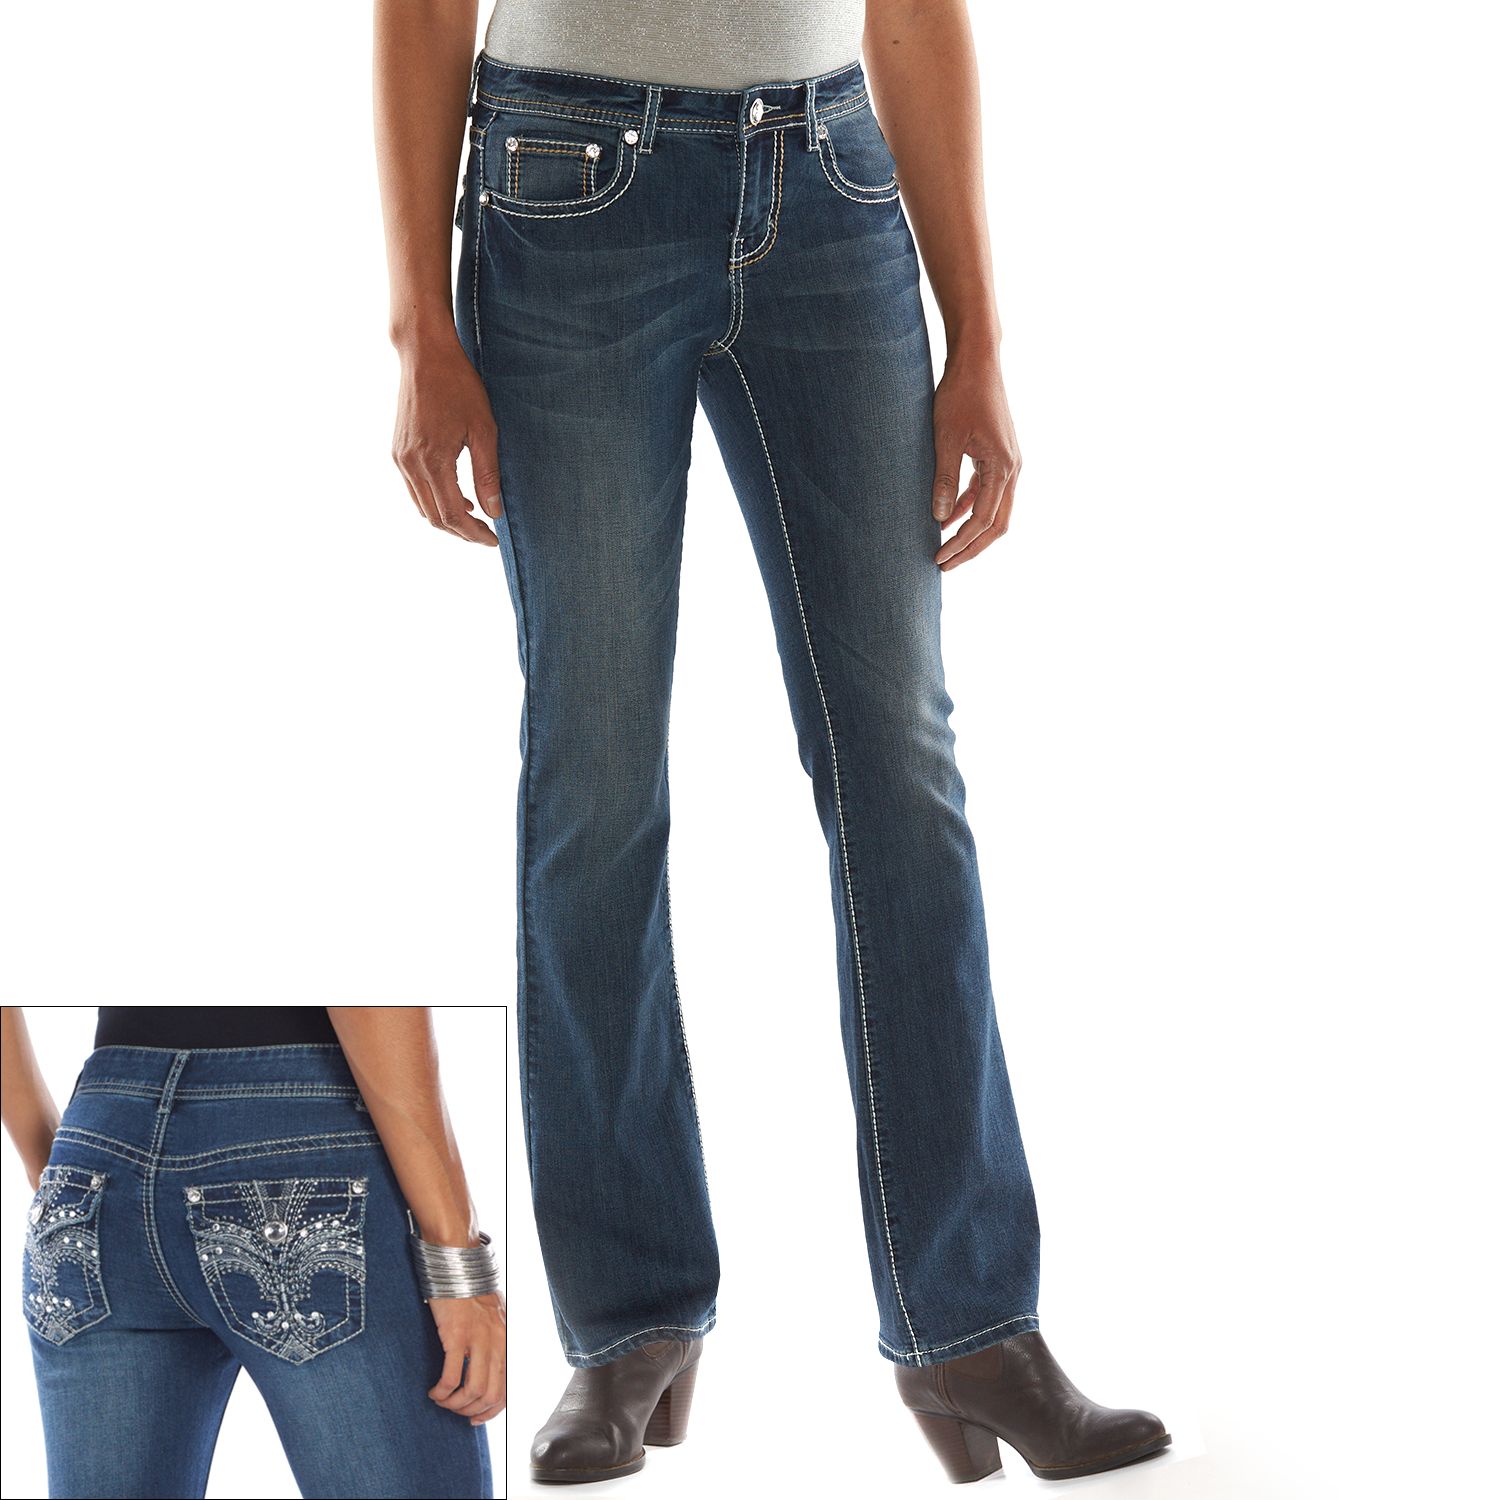 women's jeans with rhinestones on back pockets